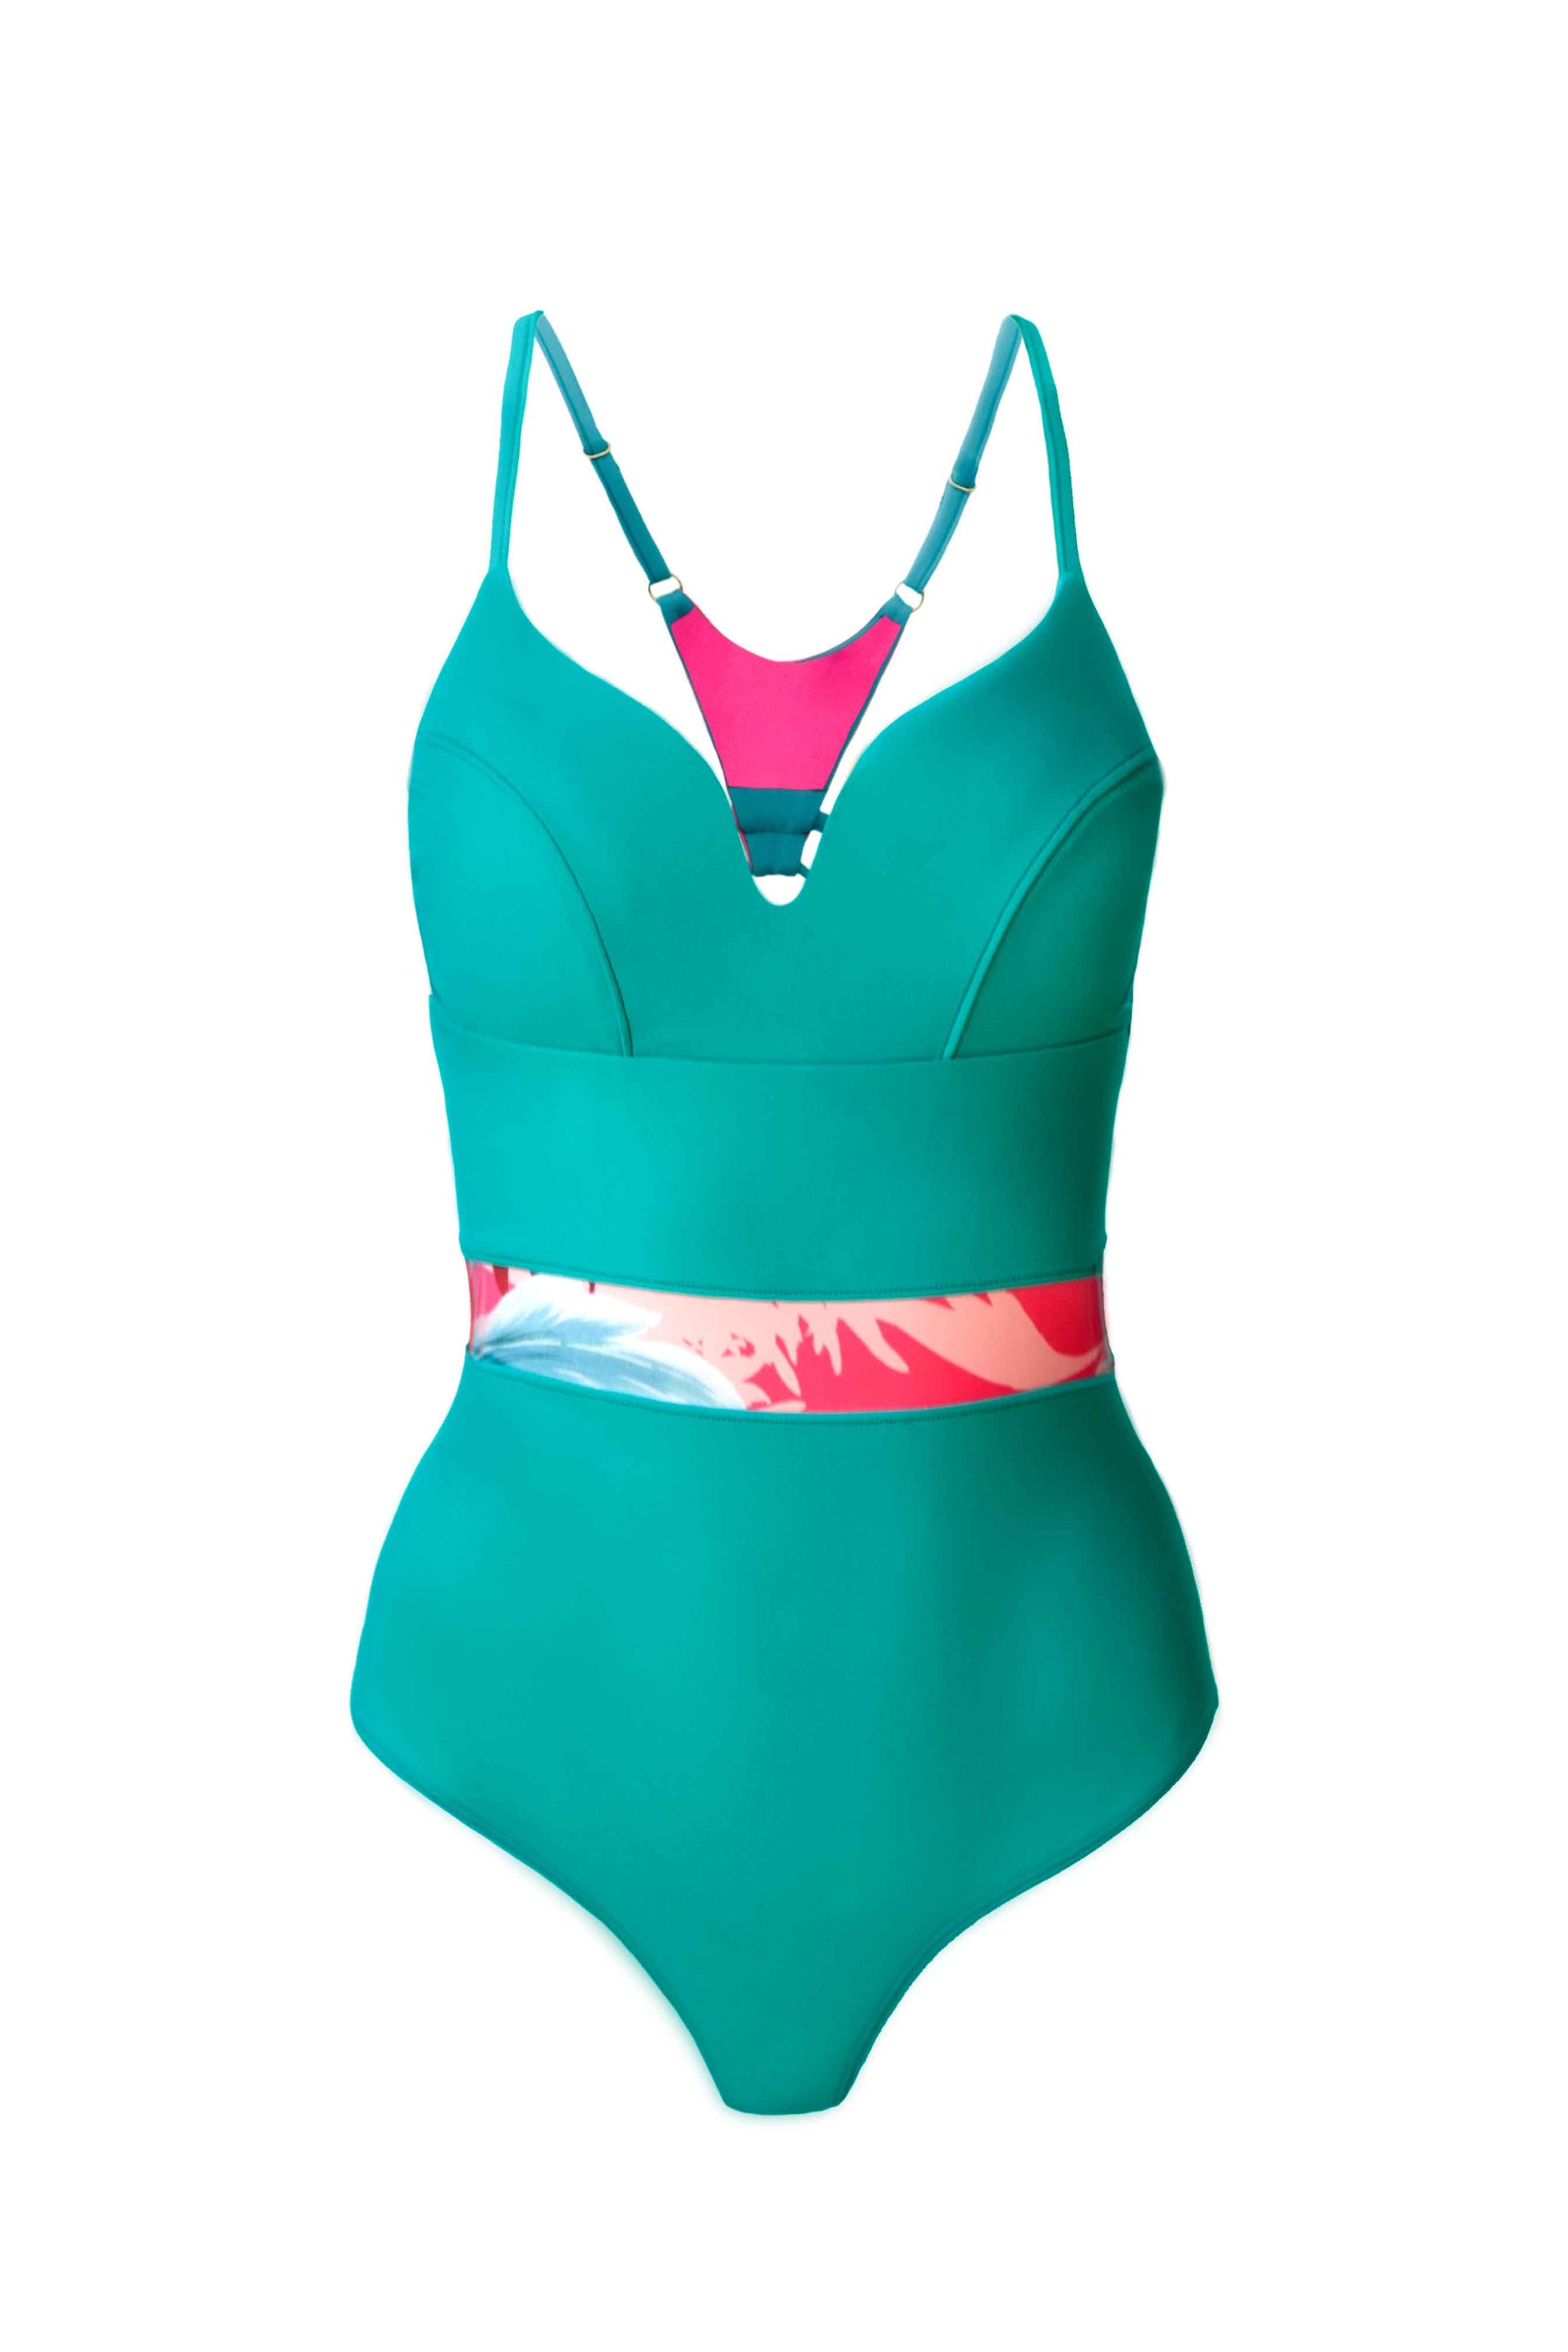 Fashionable One Piece Swimsuit For Women Comfortable Nylon Material With  Soft Bra Sized Swimwear Available In Sizes S XXL From Gosomlion, $15.83